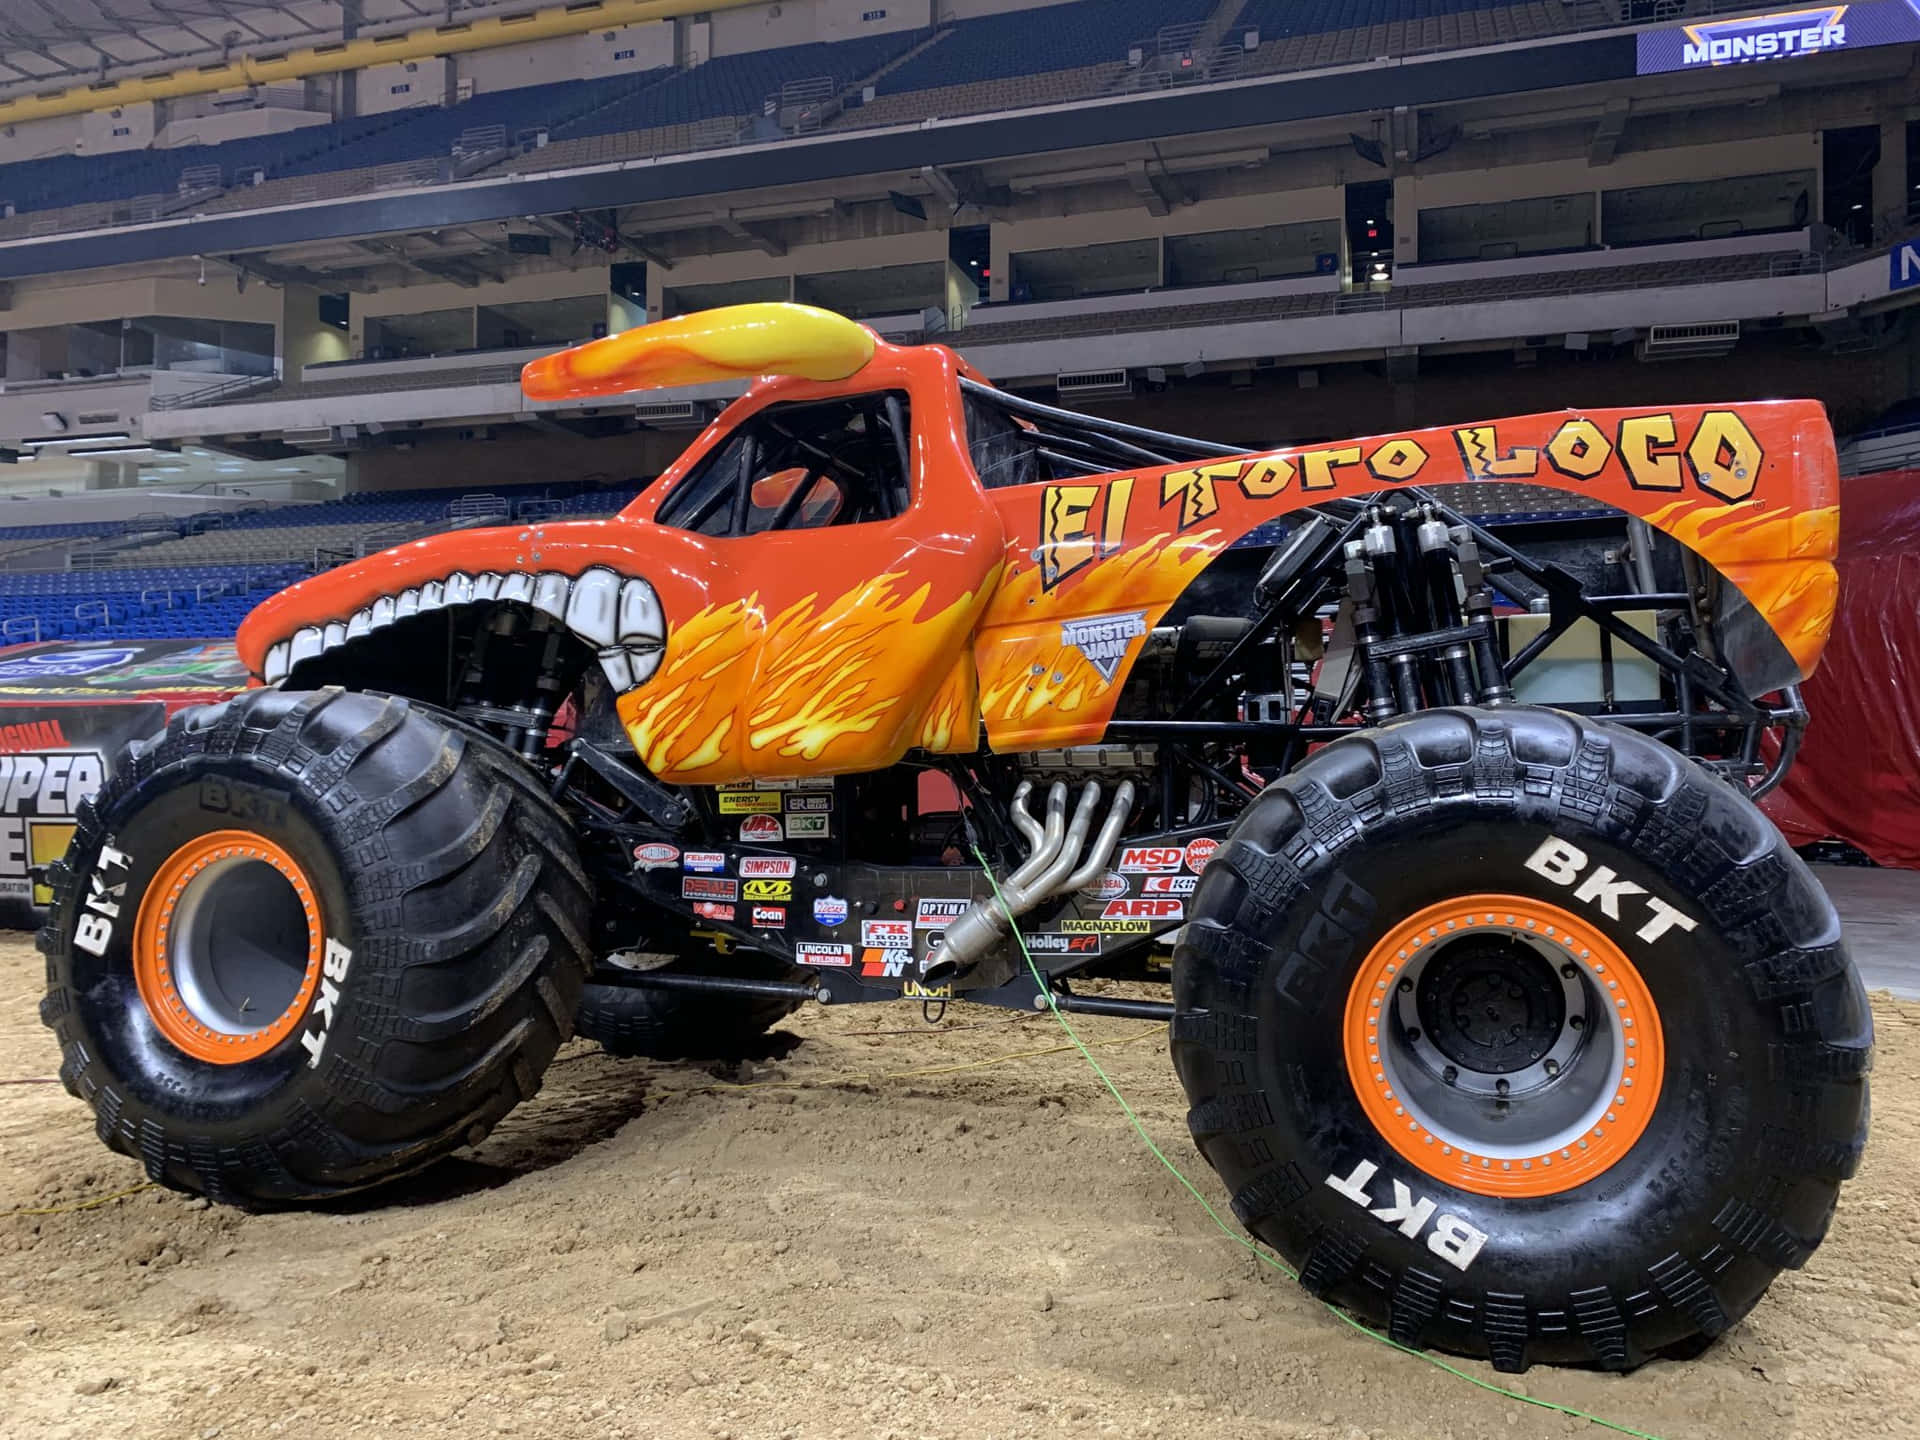 Red El Toco Loco Monster Truck Picture